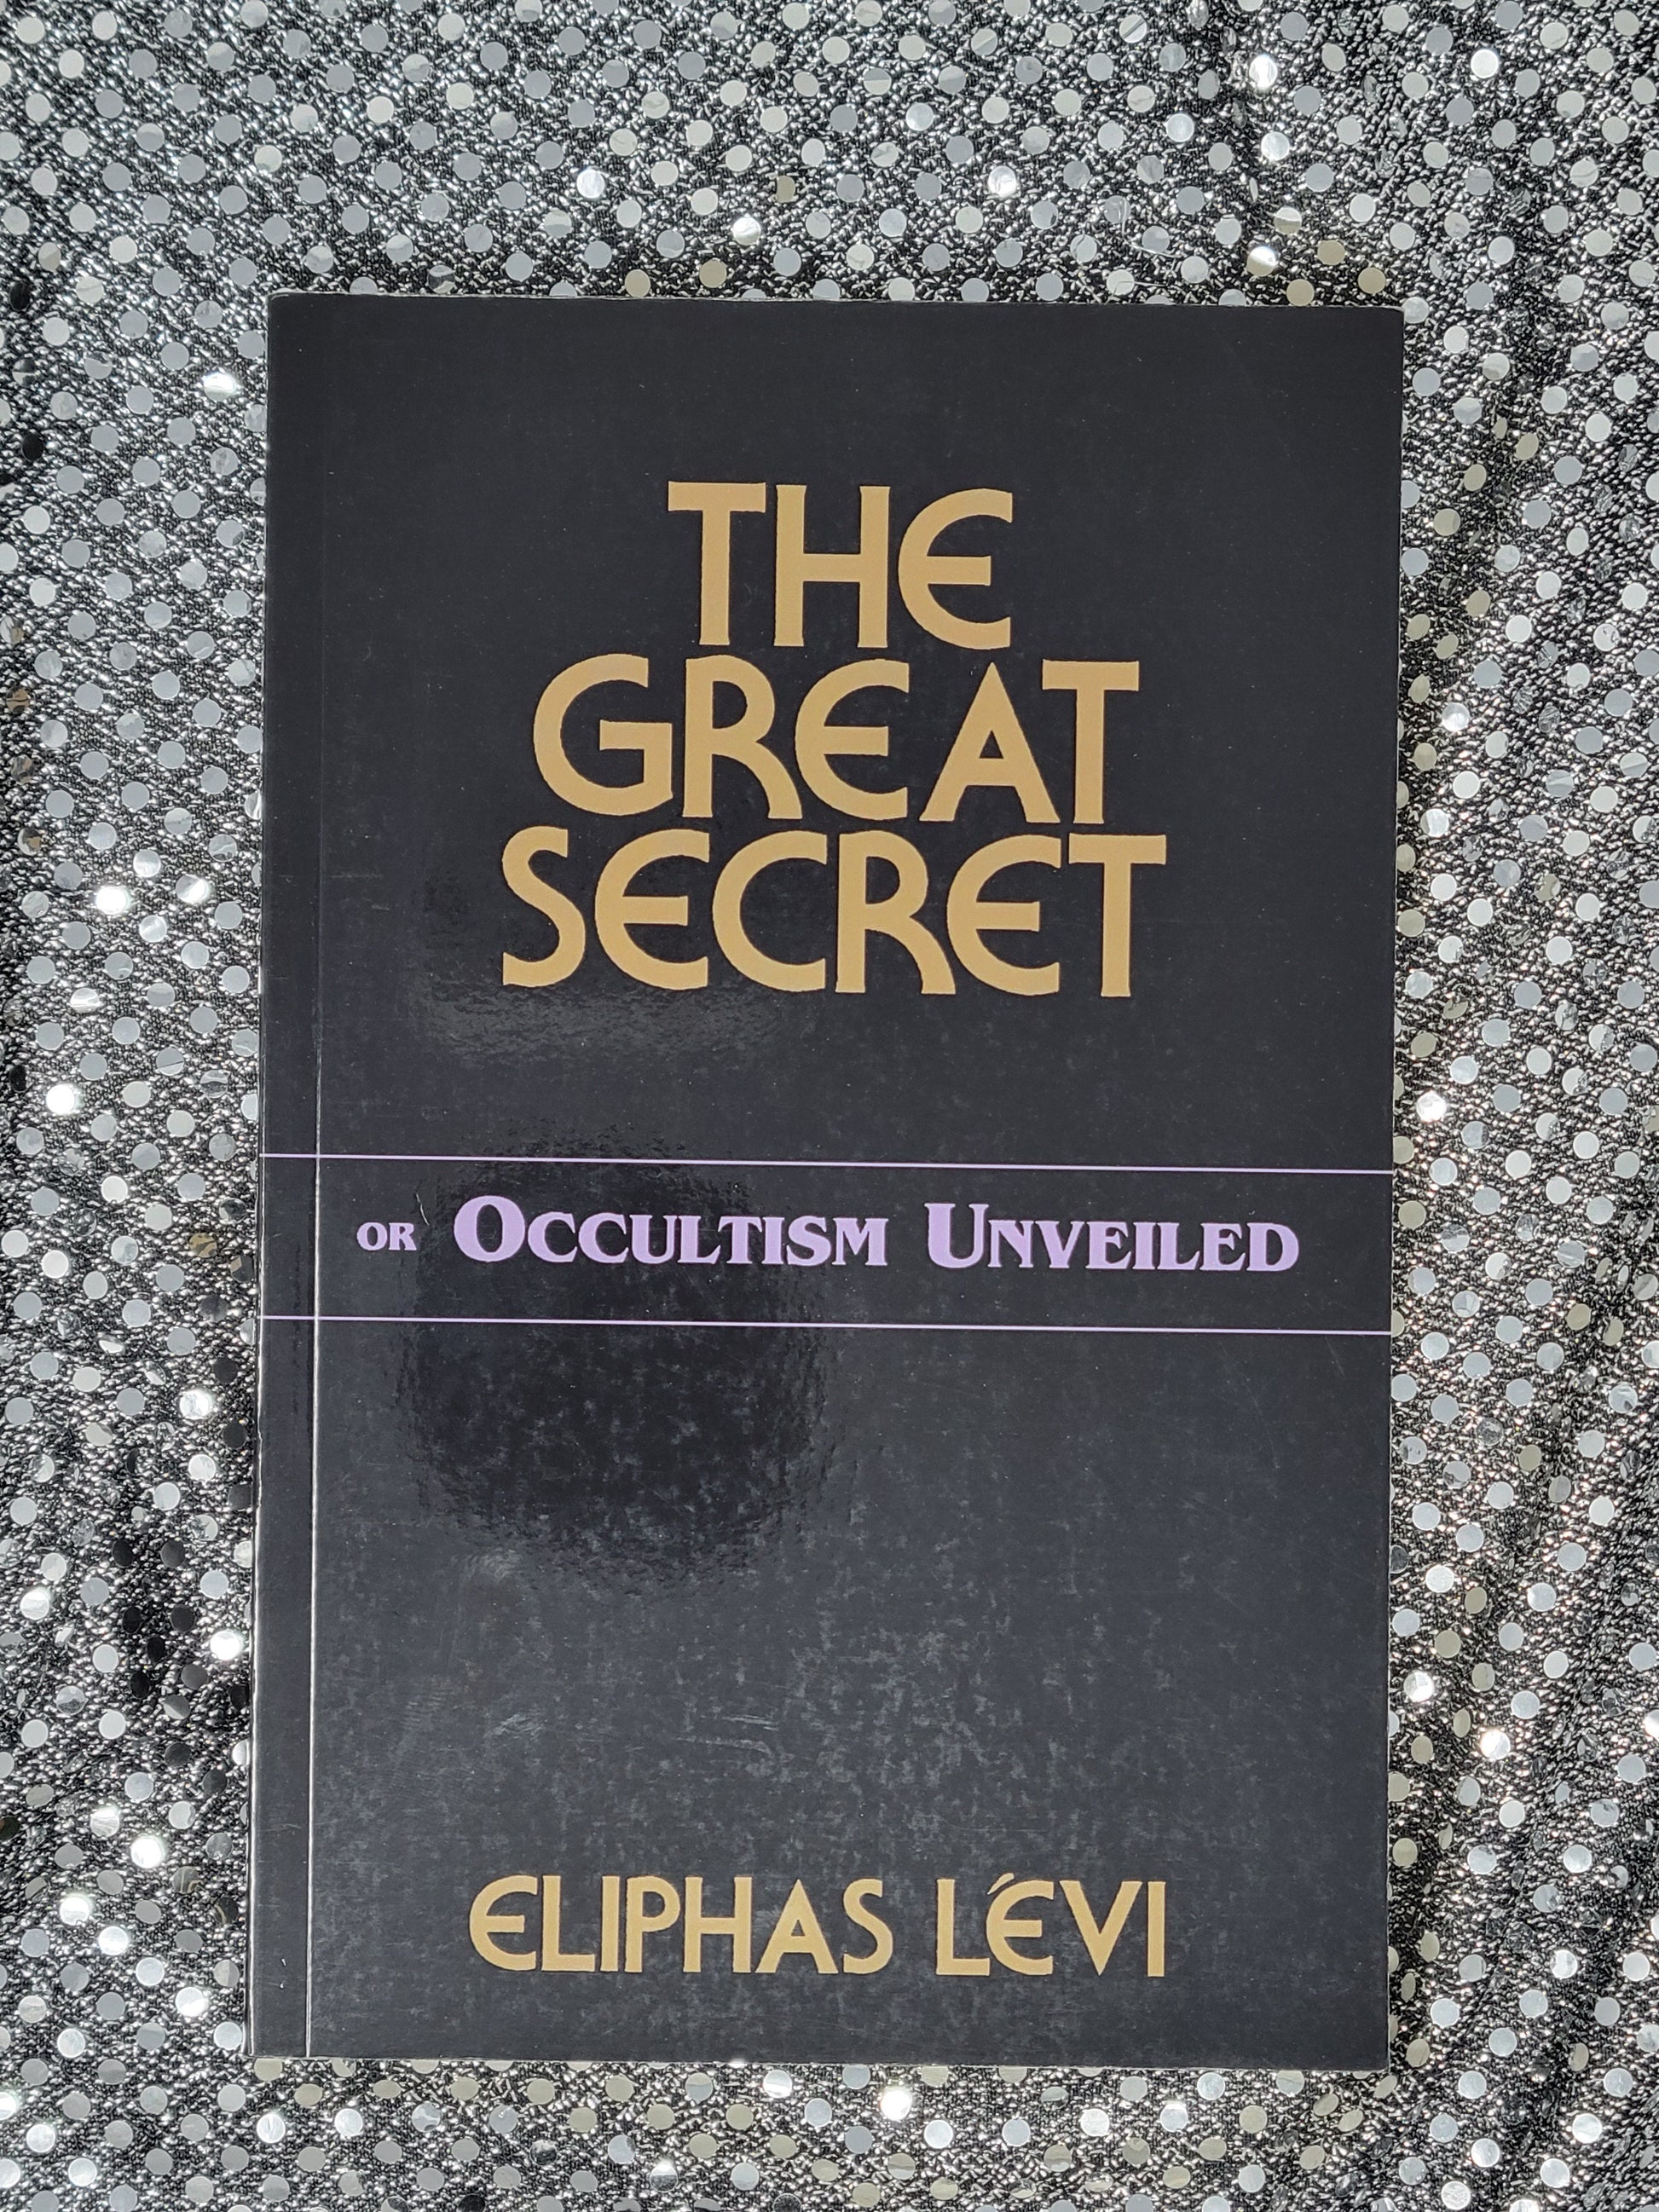 The Great Secret: Or Occultism Unveiled - Eliphas Levi